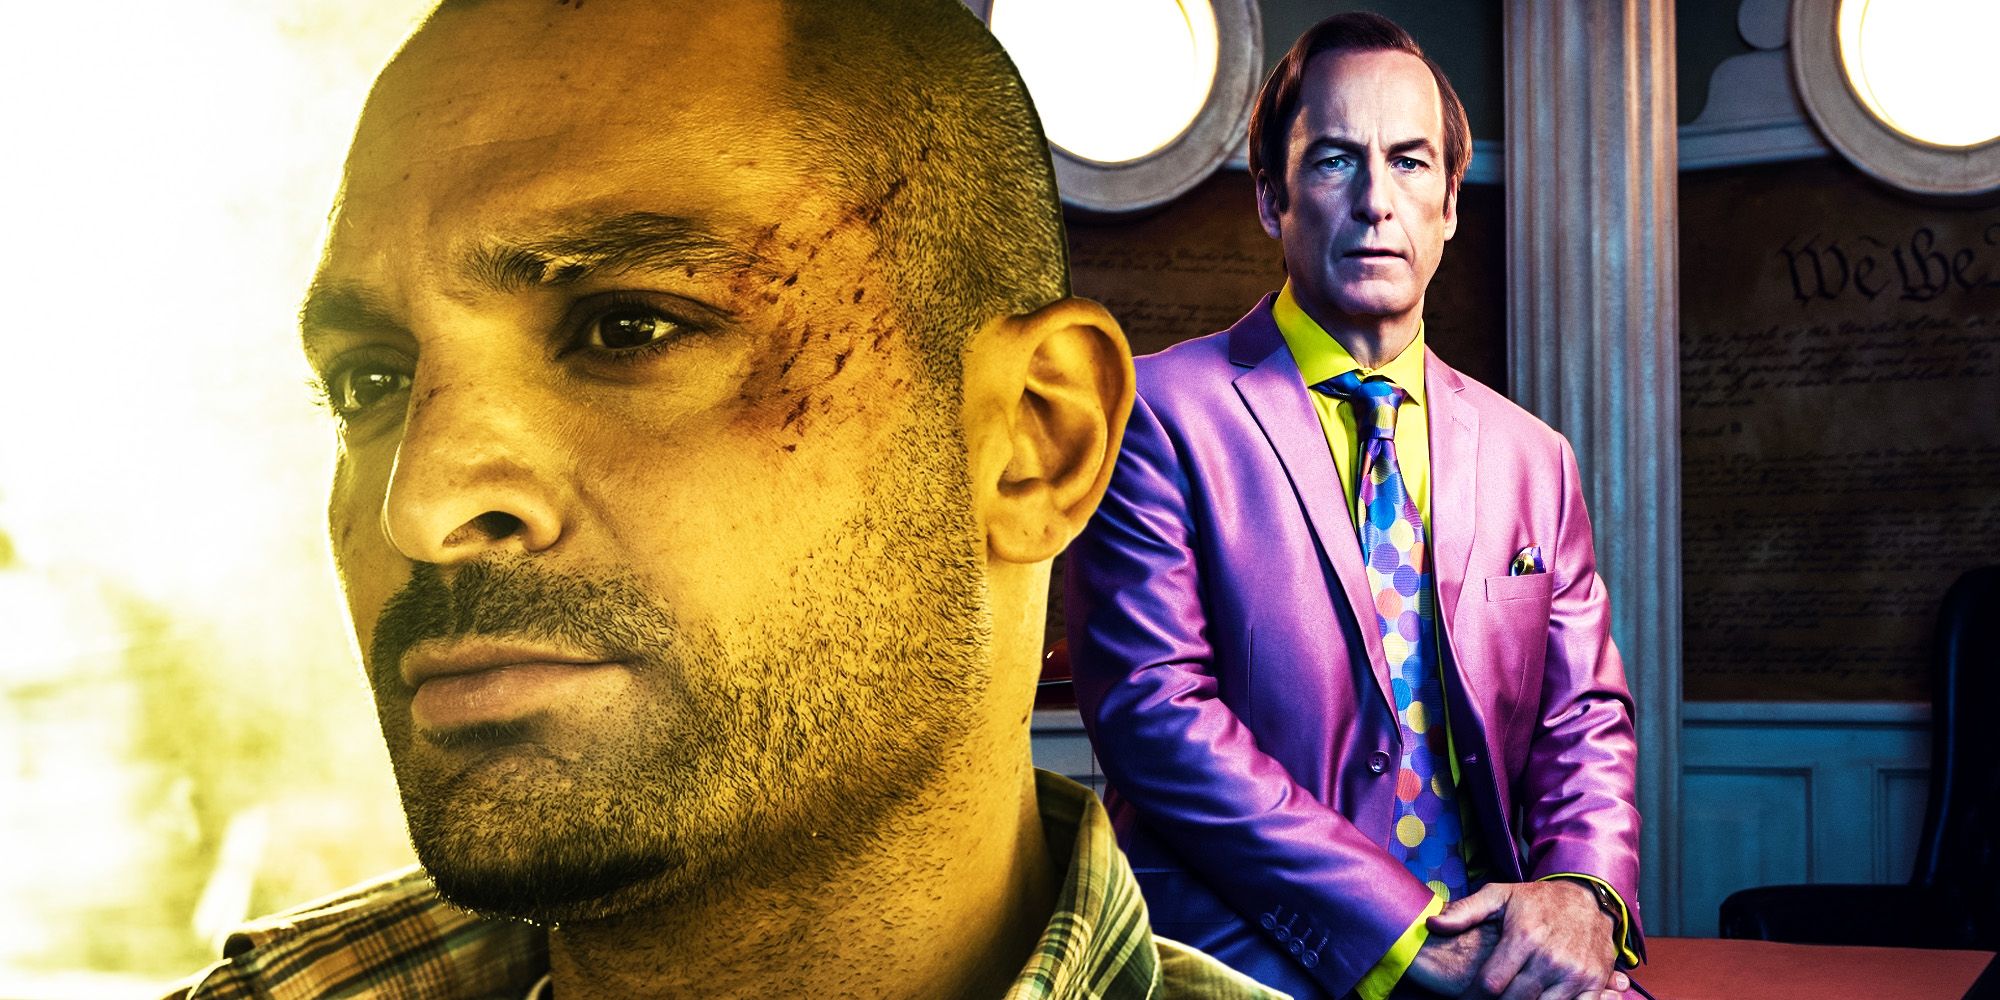 Better call saul final season Lived Up To Its Brutal Promise jimmy nacho